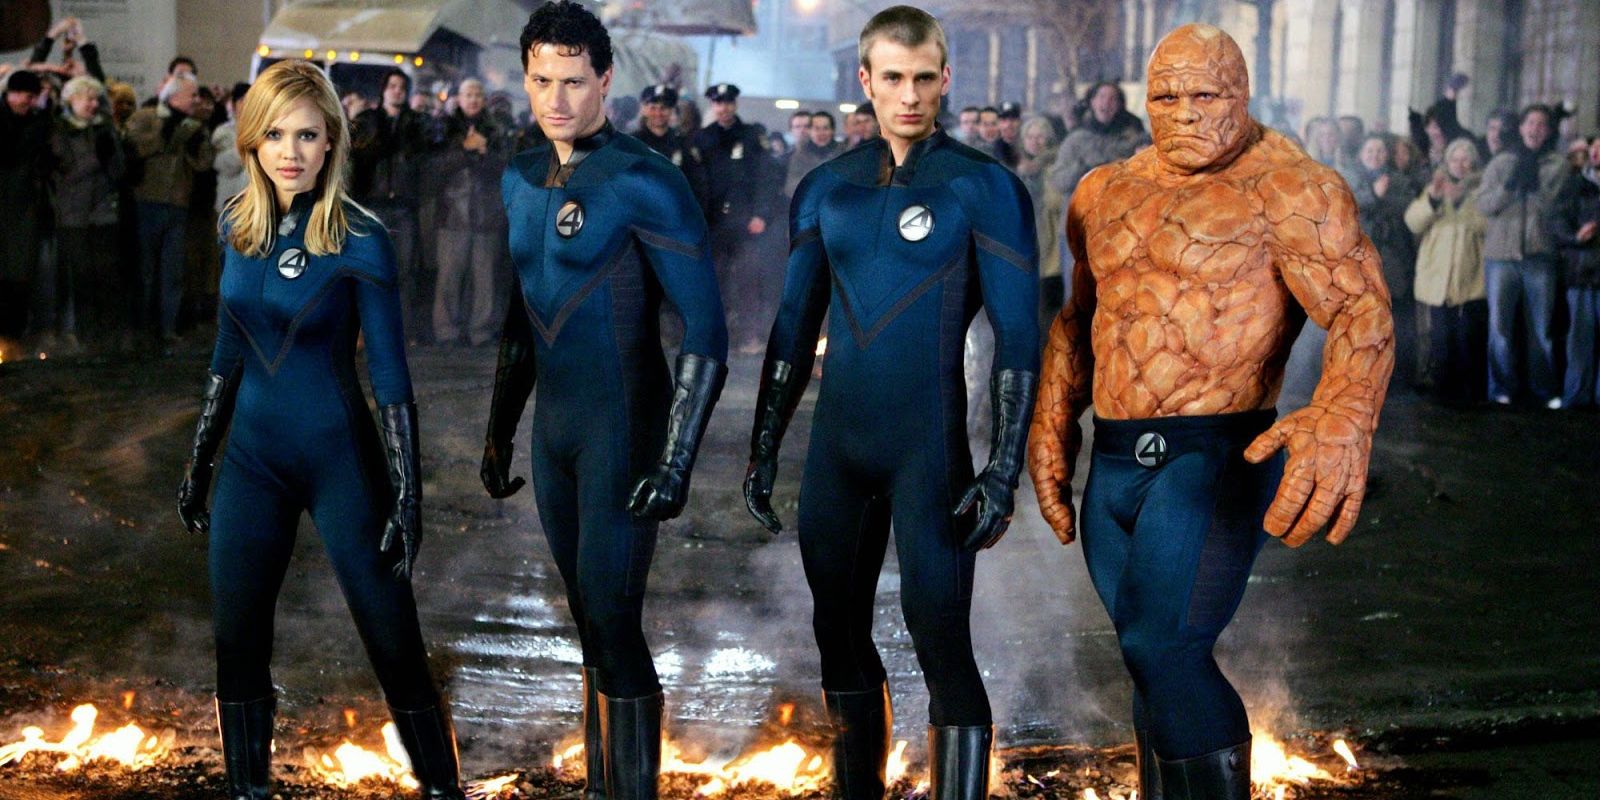 The Fantastic Four standing on the street in the 2005 movie